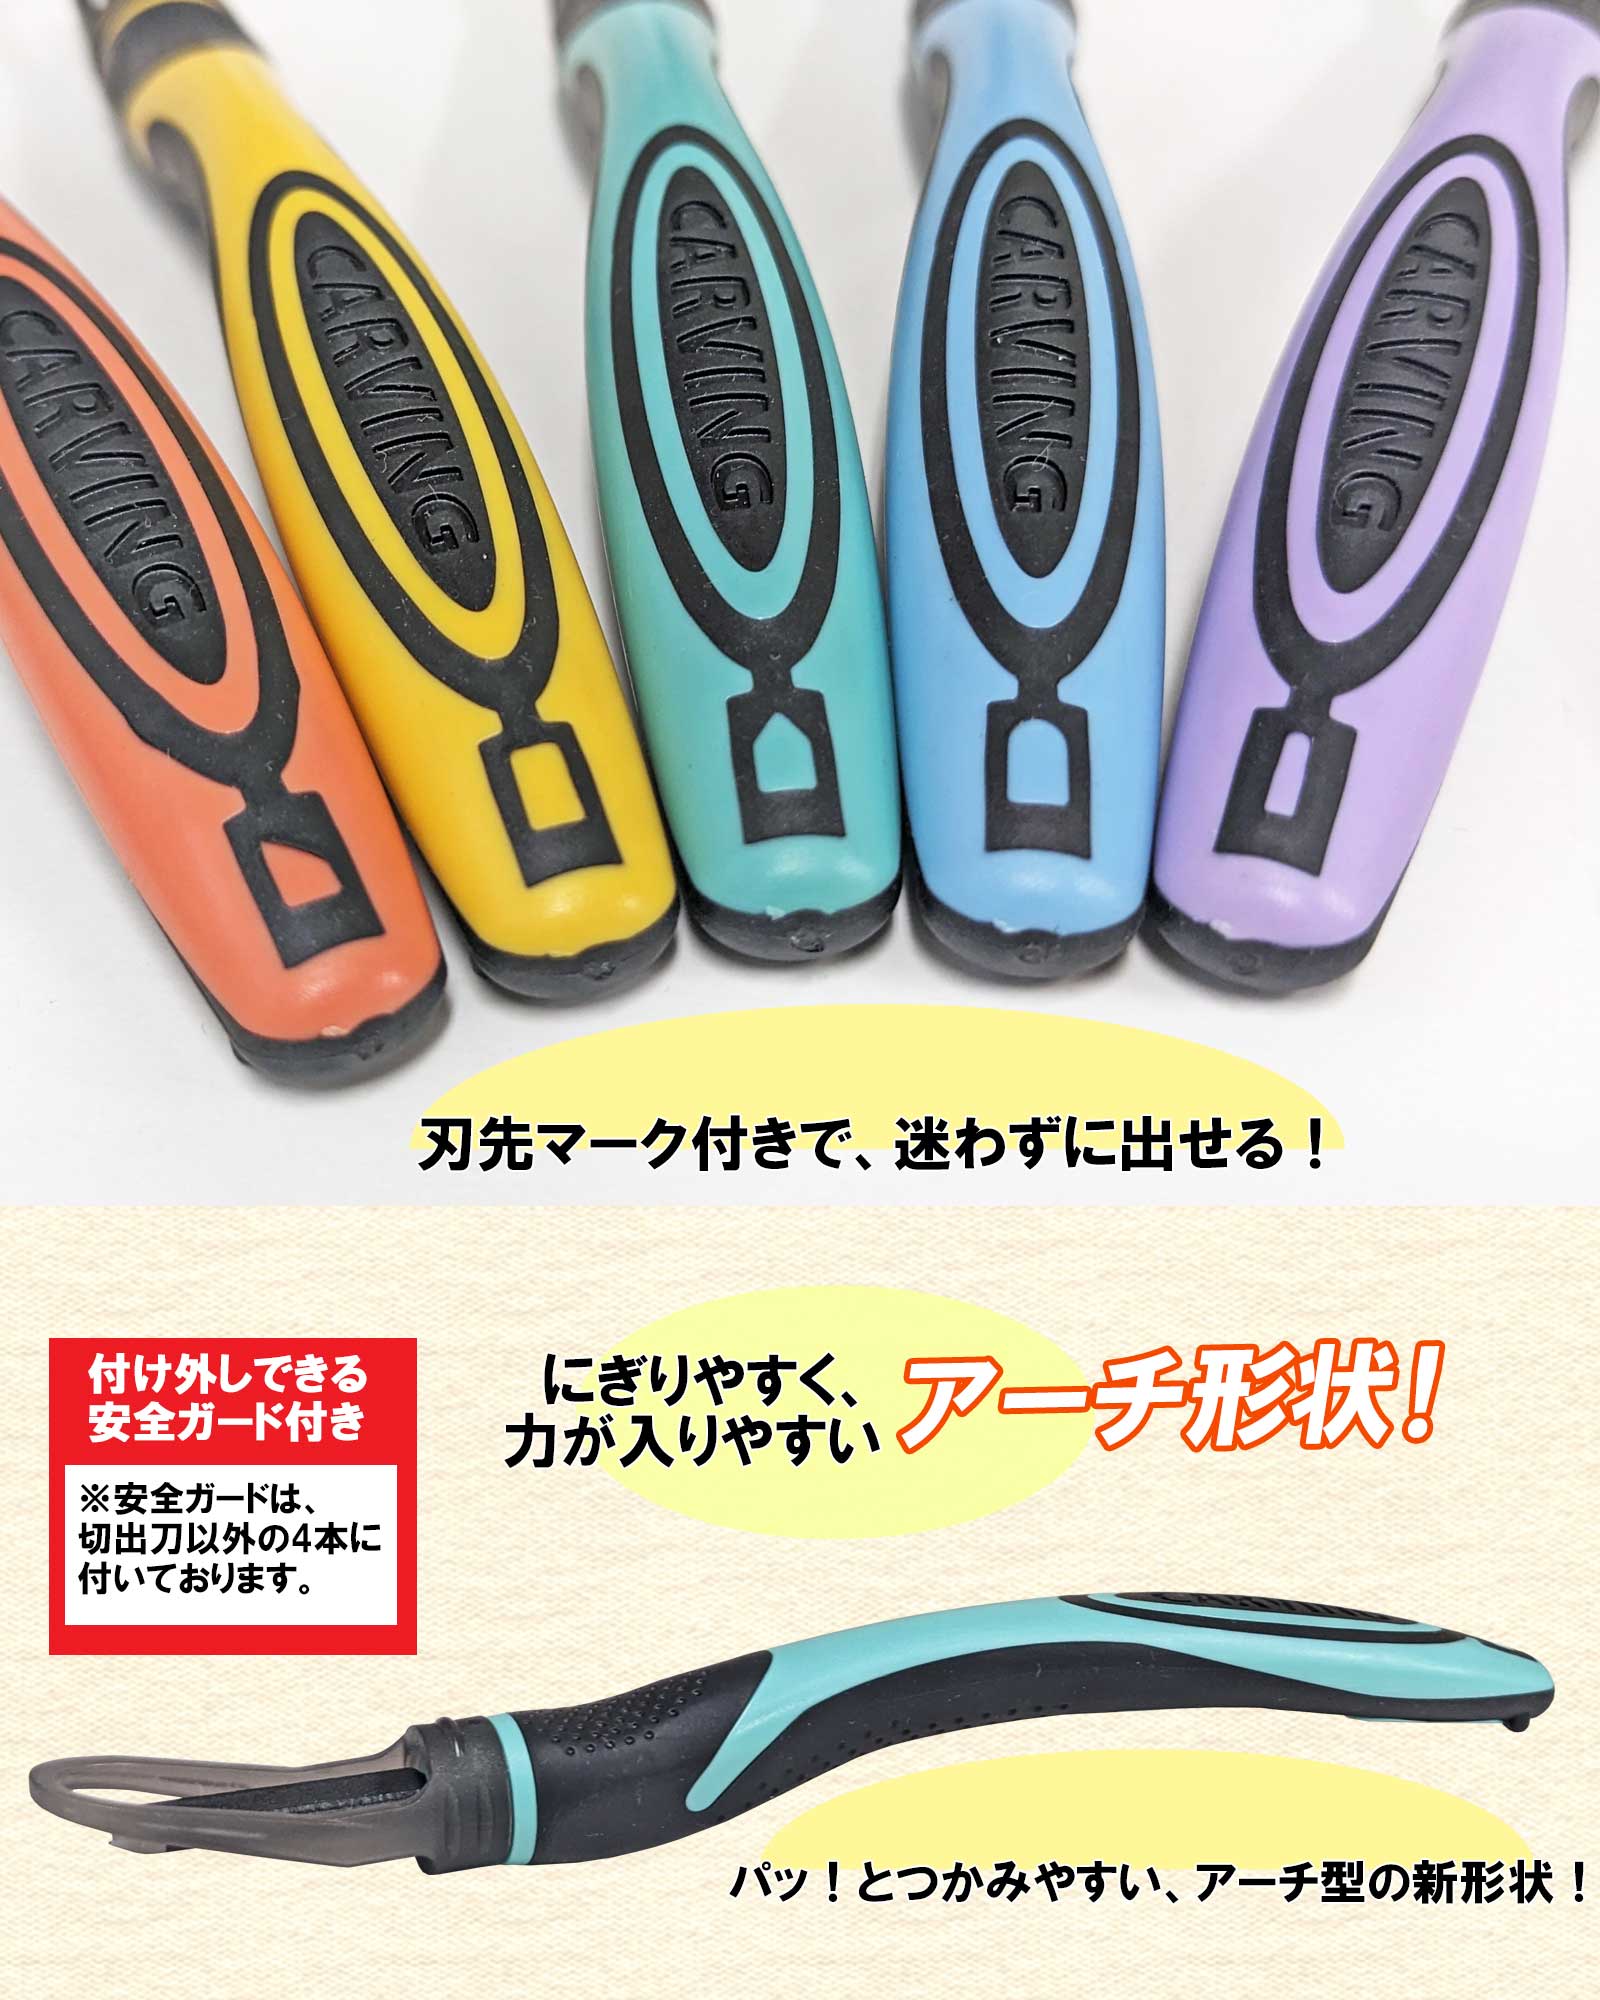  carving knife set shuta- Dell 2WAY GRIP carving knife safety guard attaching . spring cutlery .. is . elementary school man 